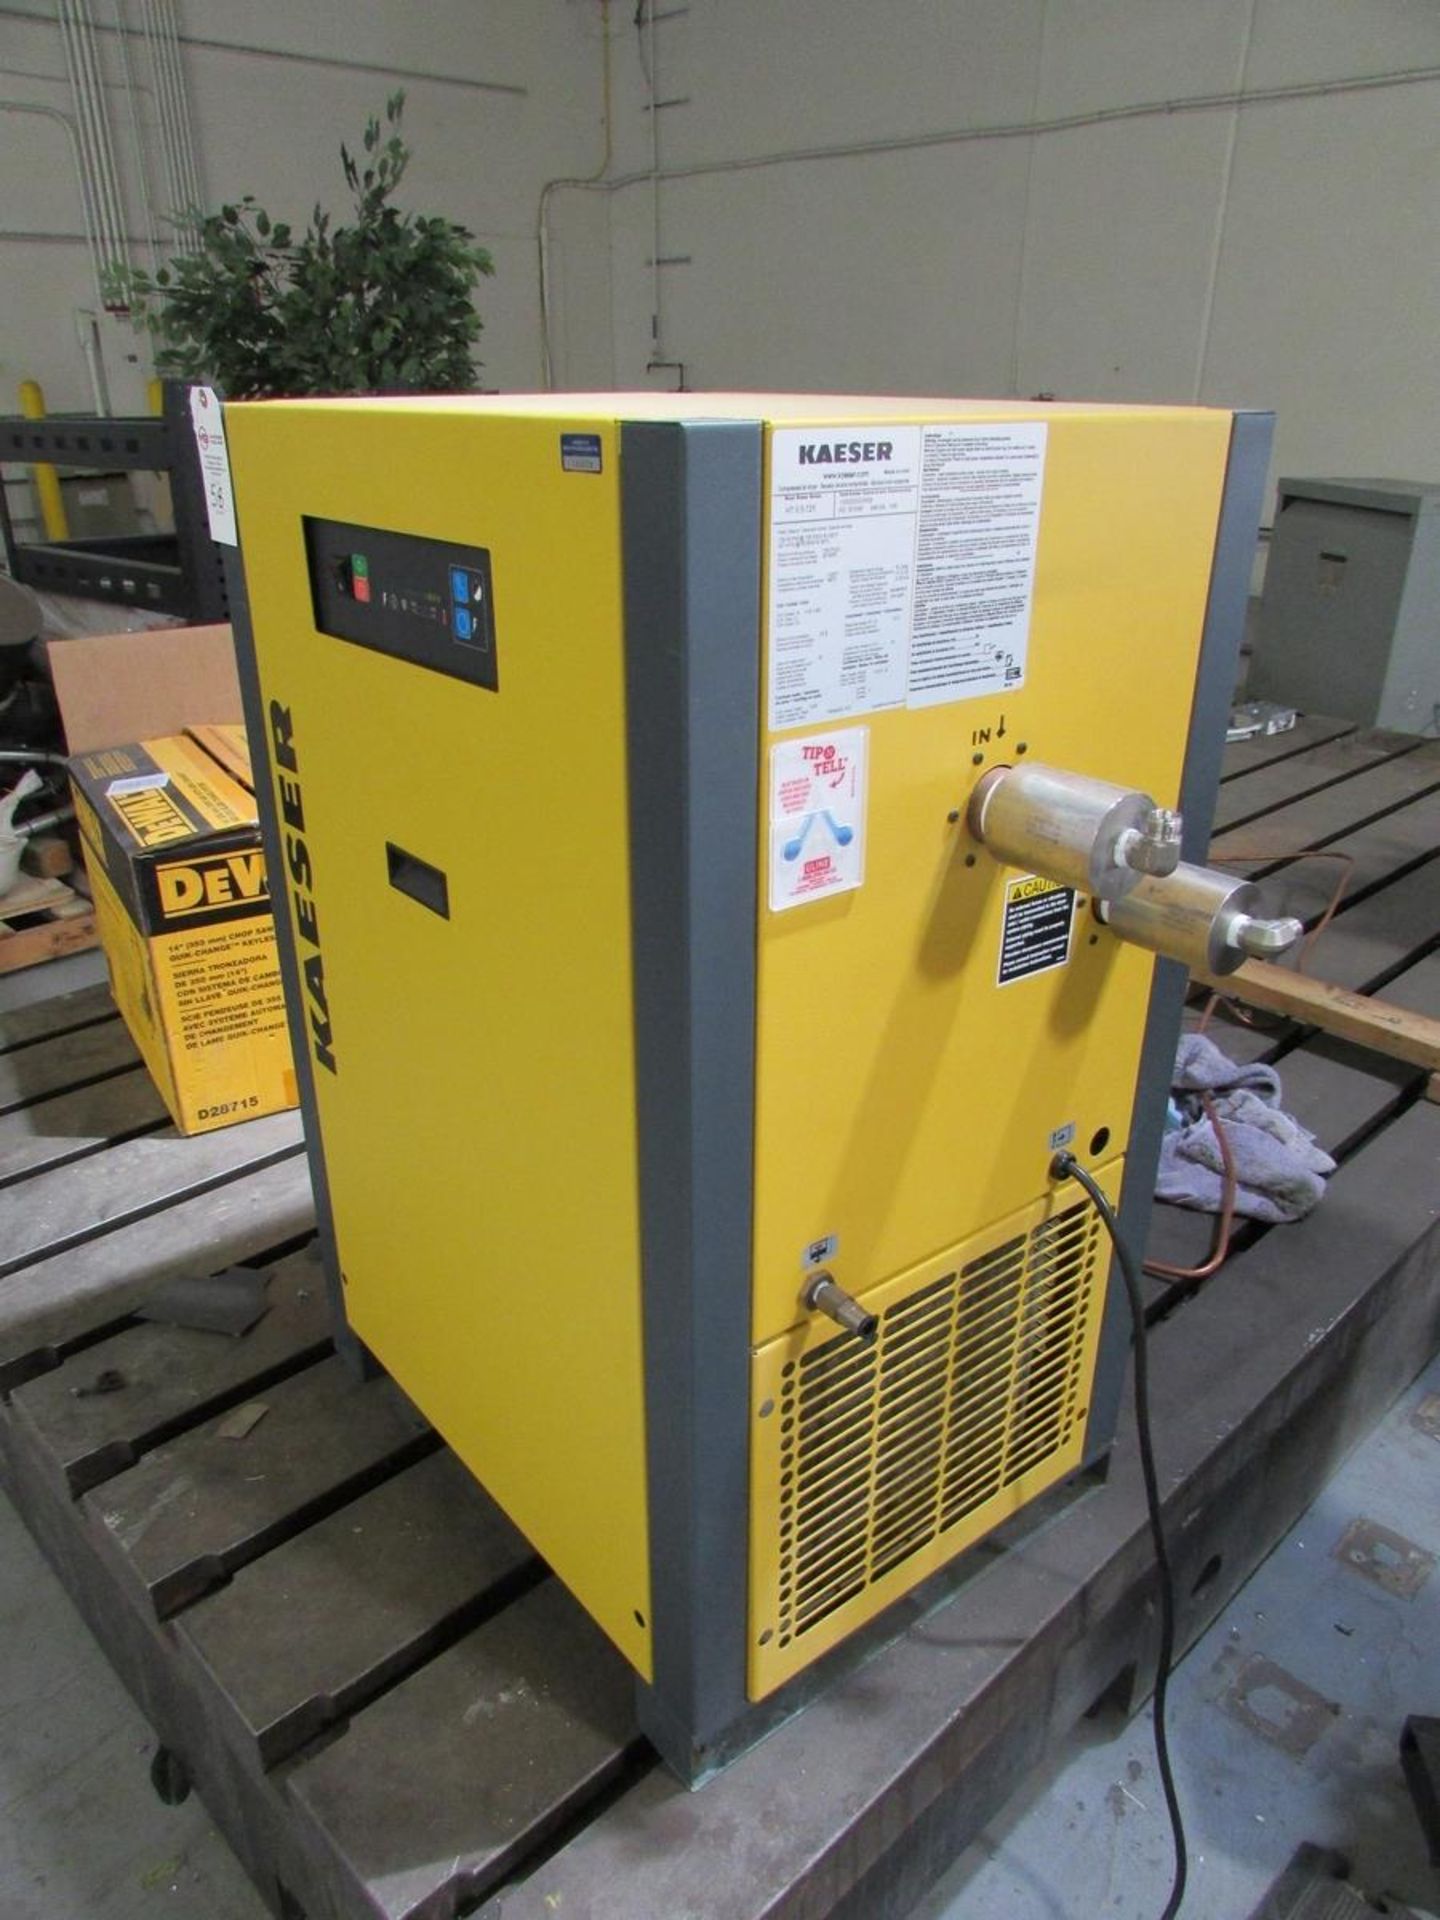 Kaeser aHT0.5-725 Refrigerated Compressed Air Dryer - Image 9 of 18